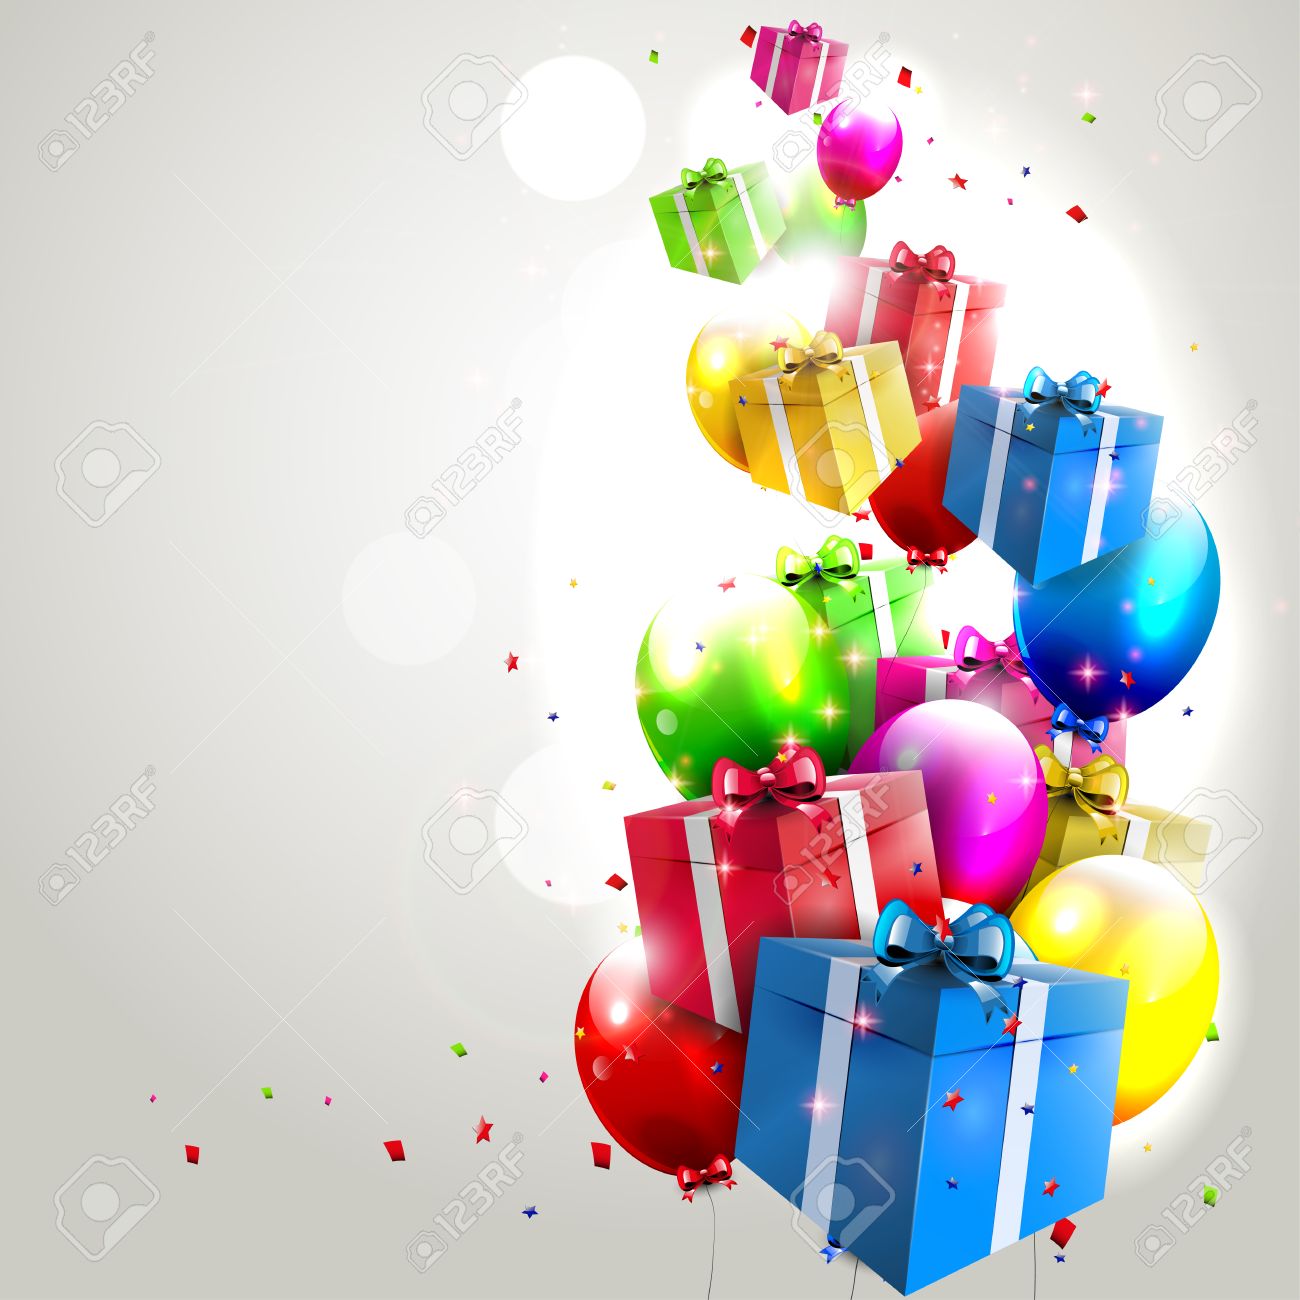 Modern BirtHDay Background With Colorful Balloons And Gifts